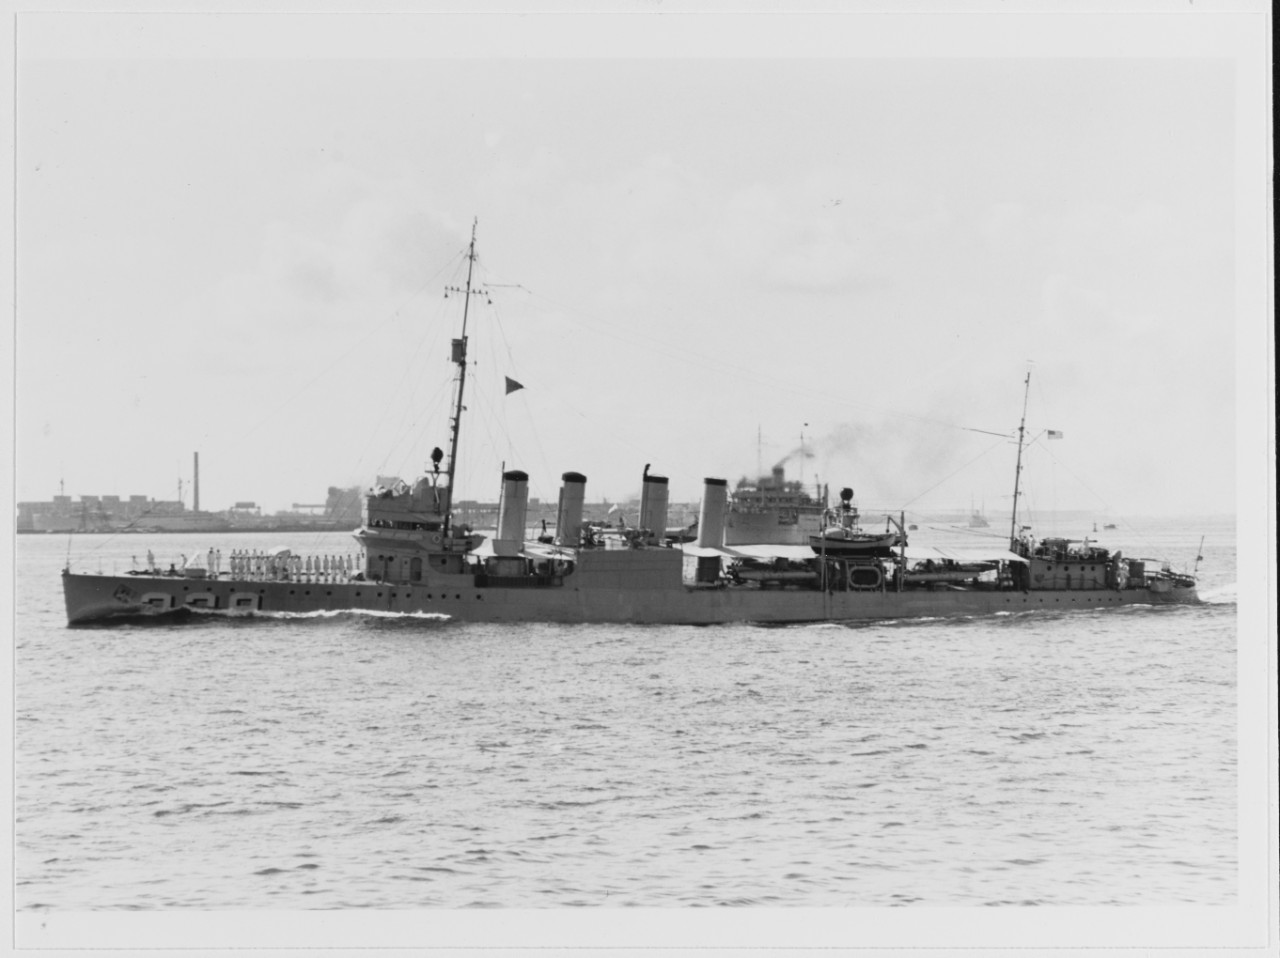 USS TRUXTUN (DD-229) steaming in harbor, with sailors paraded by her forecastle gun, during the 1930s